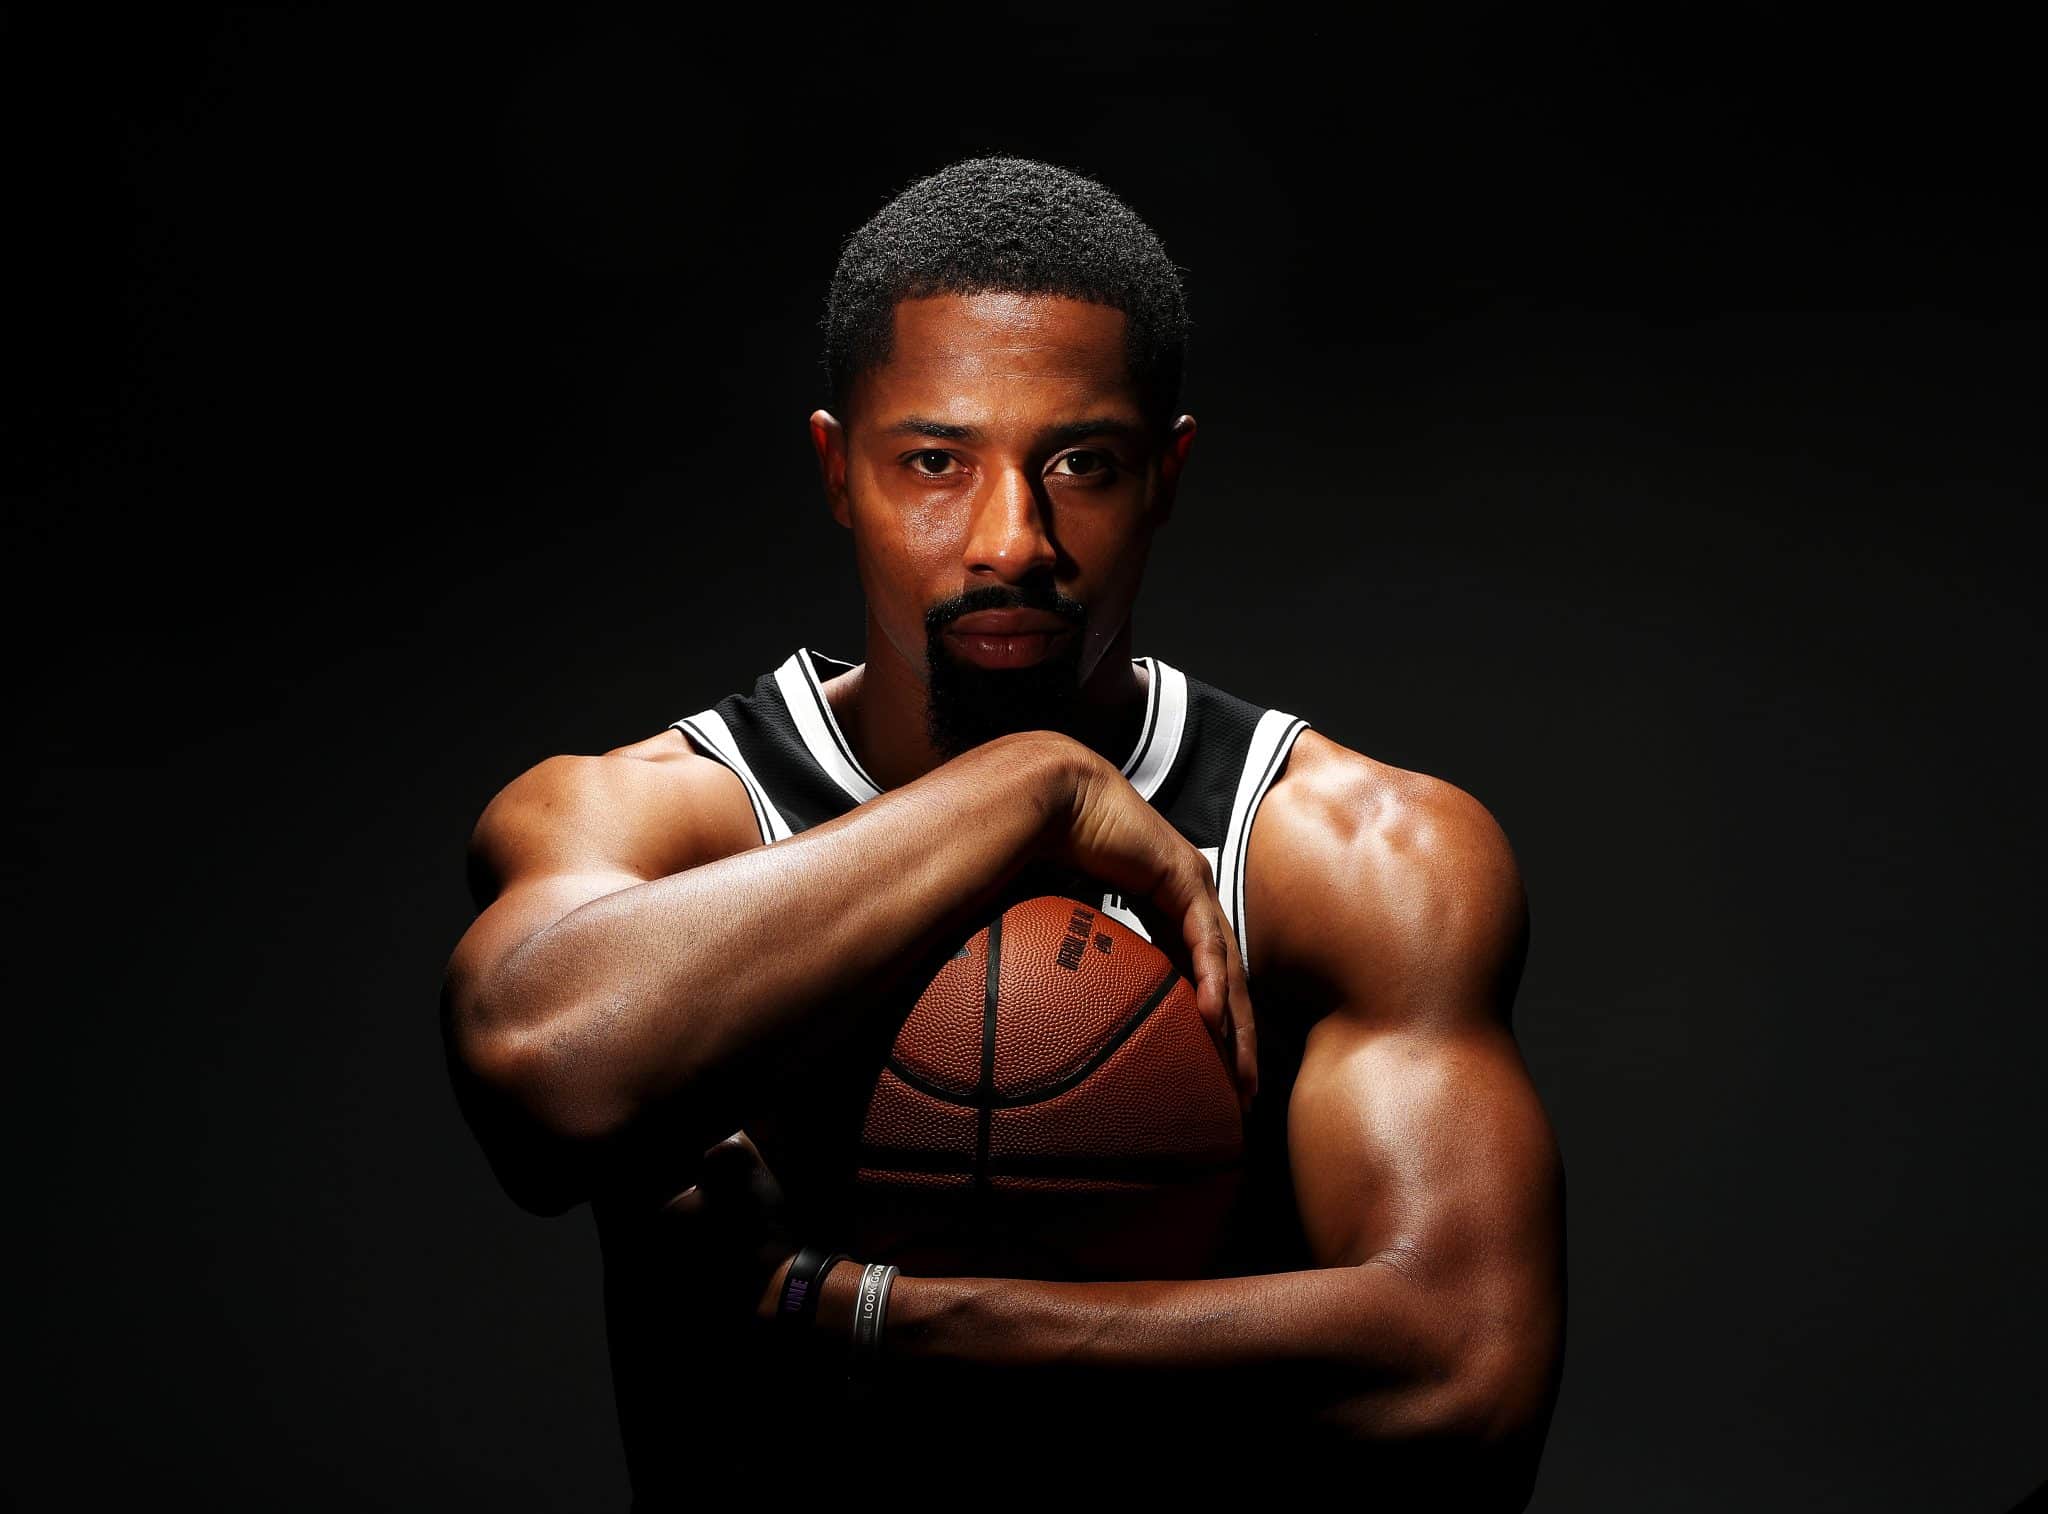 NEW YORK, NEW YORK - SEPTEMBER 27: Spencer Dinwiddie #8 of the Brooklyn Nets poses for a portrait during Media Day at HSS Training Center on September 27, 2019 in New York City.